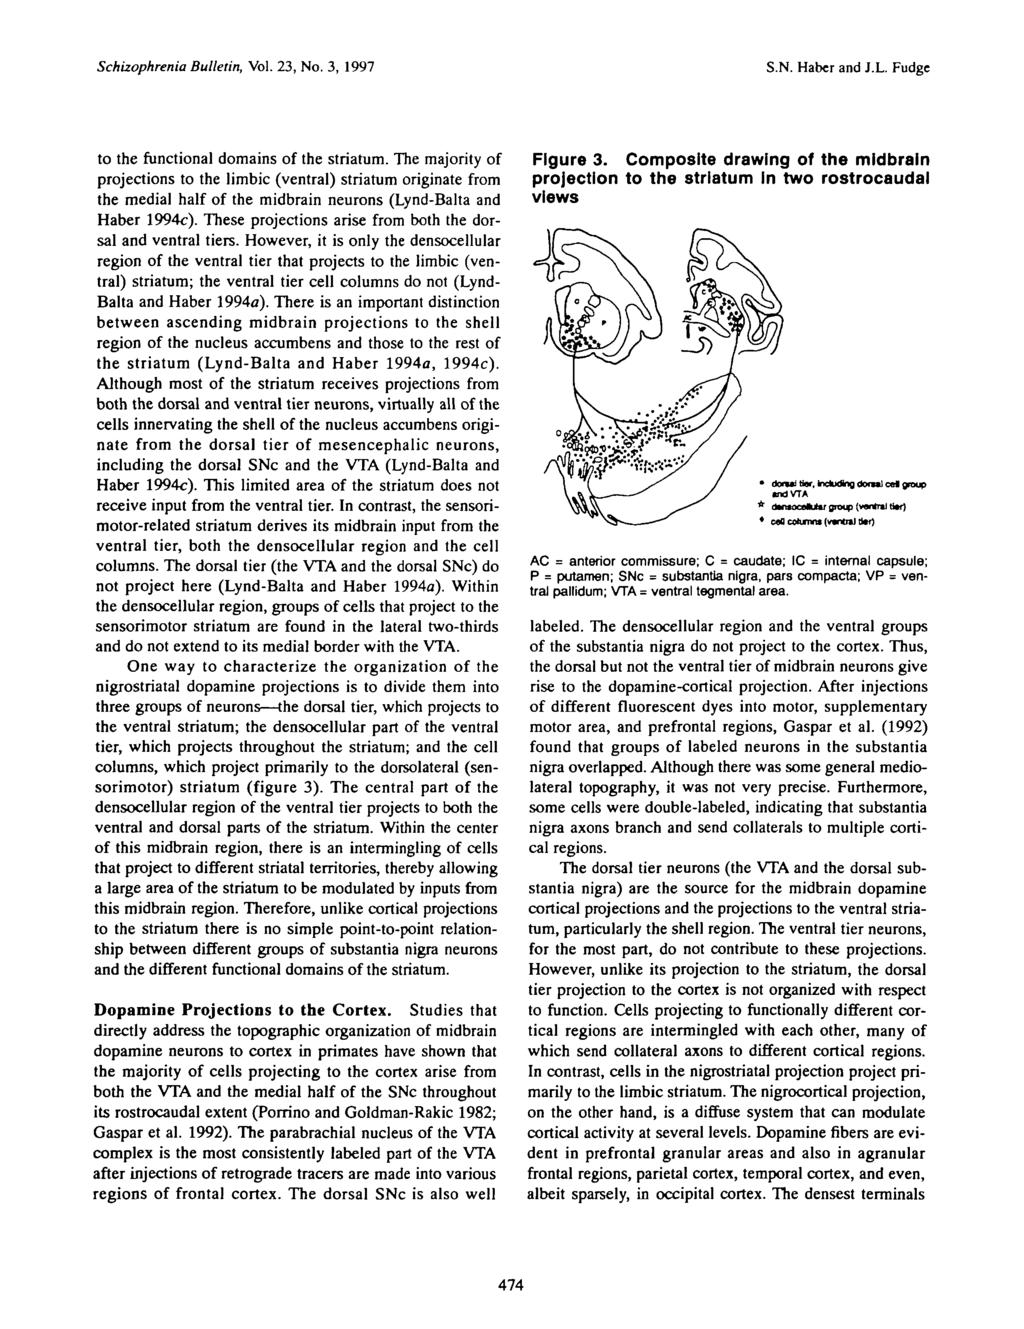 Schizophrenia Bulletin, Vol. 23, No. 3, 1997 S.N. Haber and J.L. Fudge to the functional domains of the striatum.